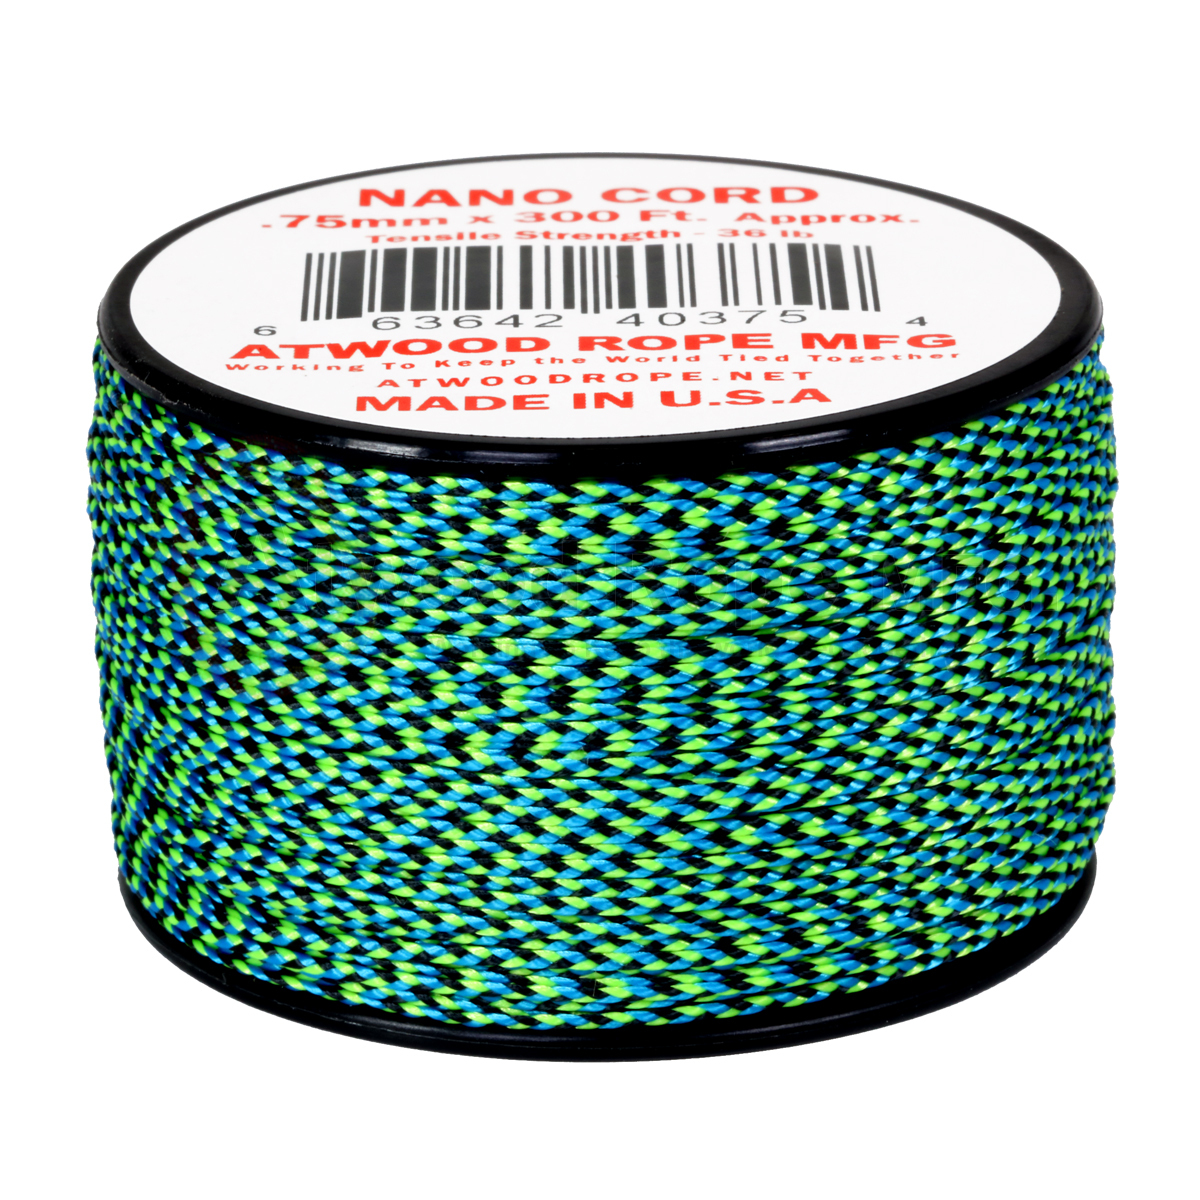 Atwood Rope MFG Nano Cord (36lb/17kg) 90m Made in USA, Various